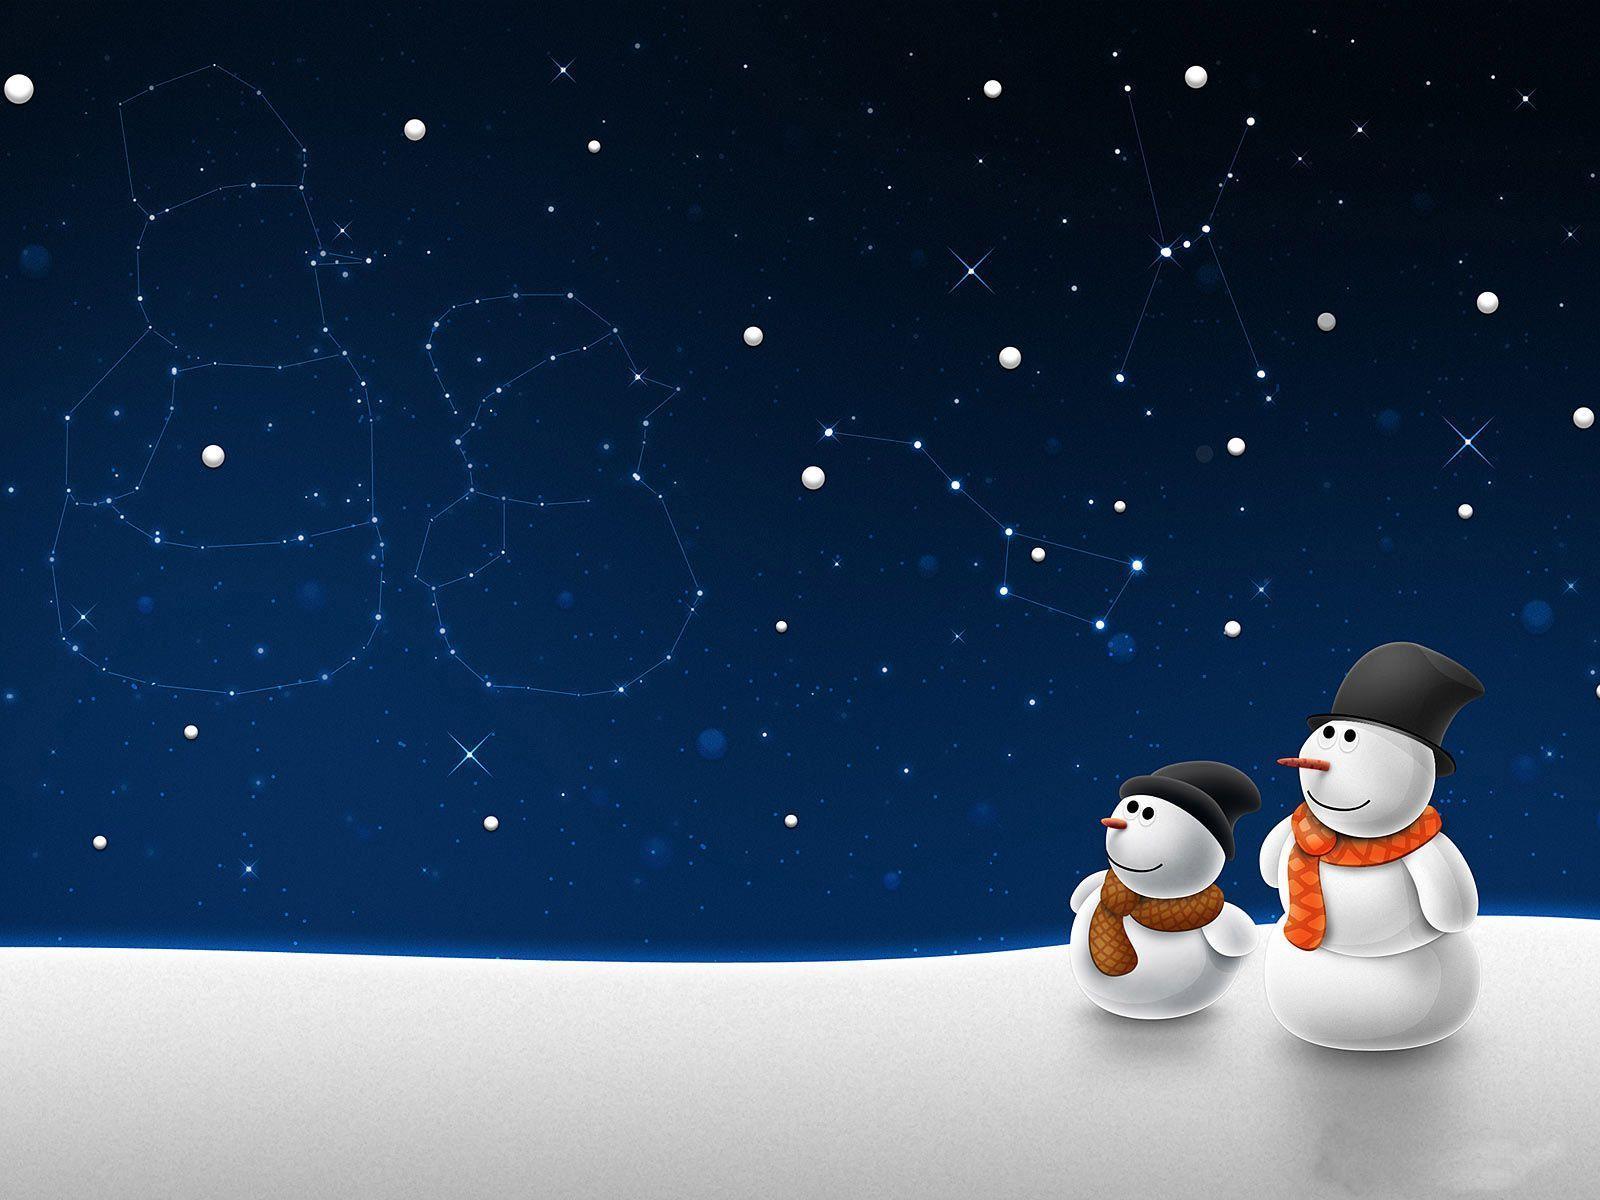 Wallpaper For > Microsoft Powerpoint Christmas Background